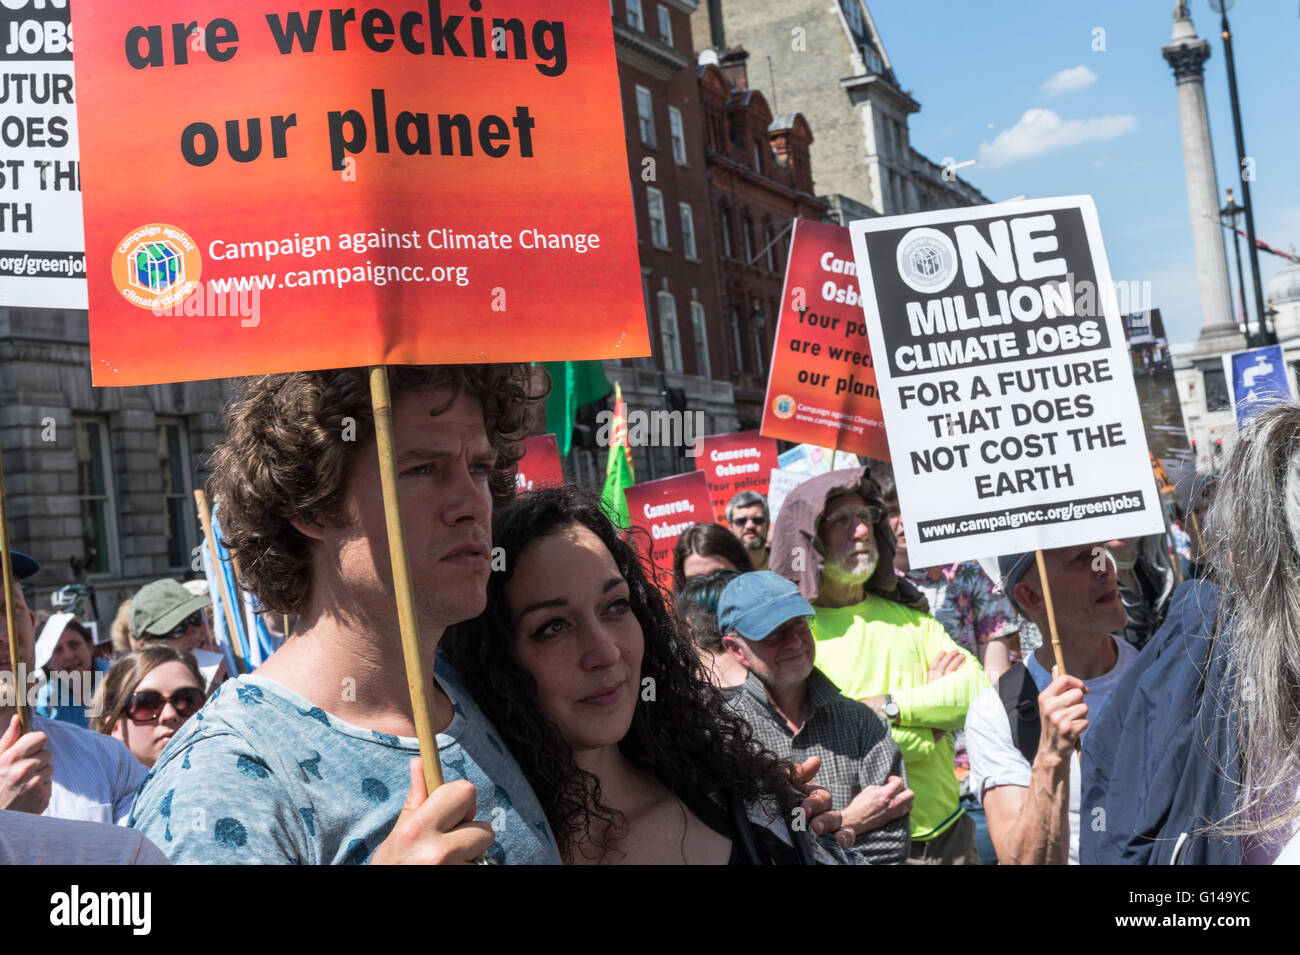 London, UK. 08th May 2016. Activists and campaigners gather to protest against government's policy on climate change. Participants marched backwards from top of  Whitehall to the Department of Health to symbolically show reversal of government actions on several issues such as fracking, renewable energy, fossil fuels, sustainable transport. Protesters appealed to go forward rather than backward on climate policy in the first anniversary of the current government. Wiktor Szymanowicz/Alamy Live News Stock Photo